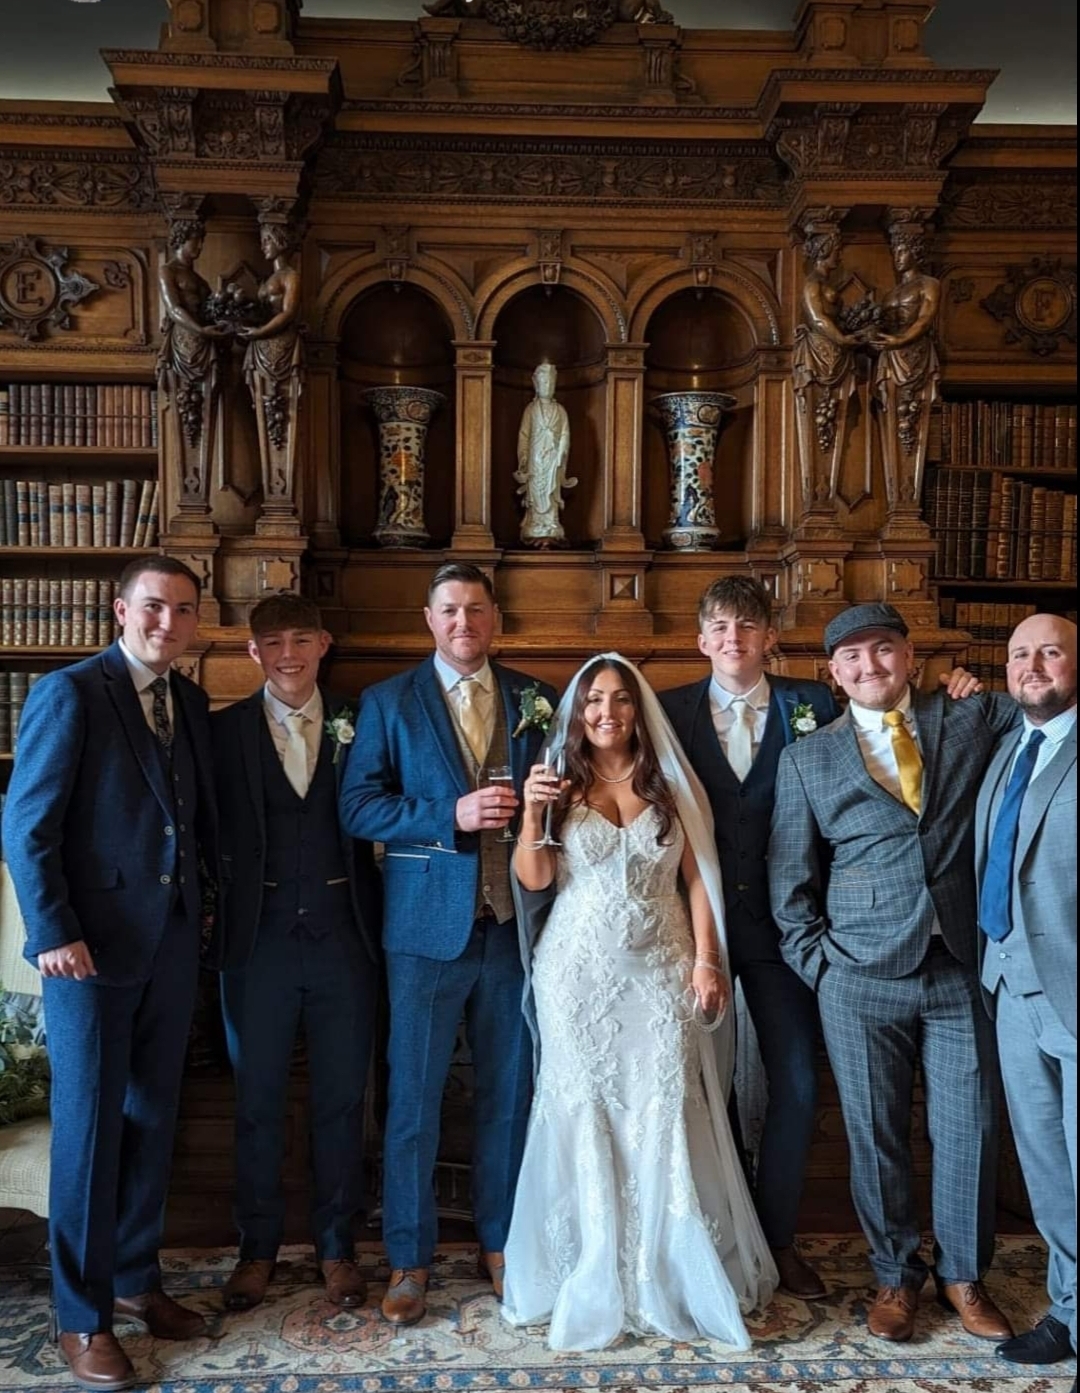 Brother Aaron, son Cam, groom Gareth, bride Rebecca, son Malachi, brother Eithan, older brother Jamie.